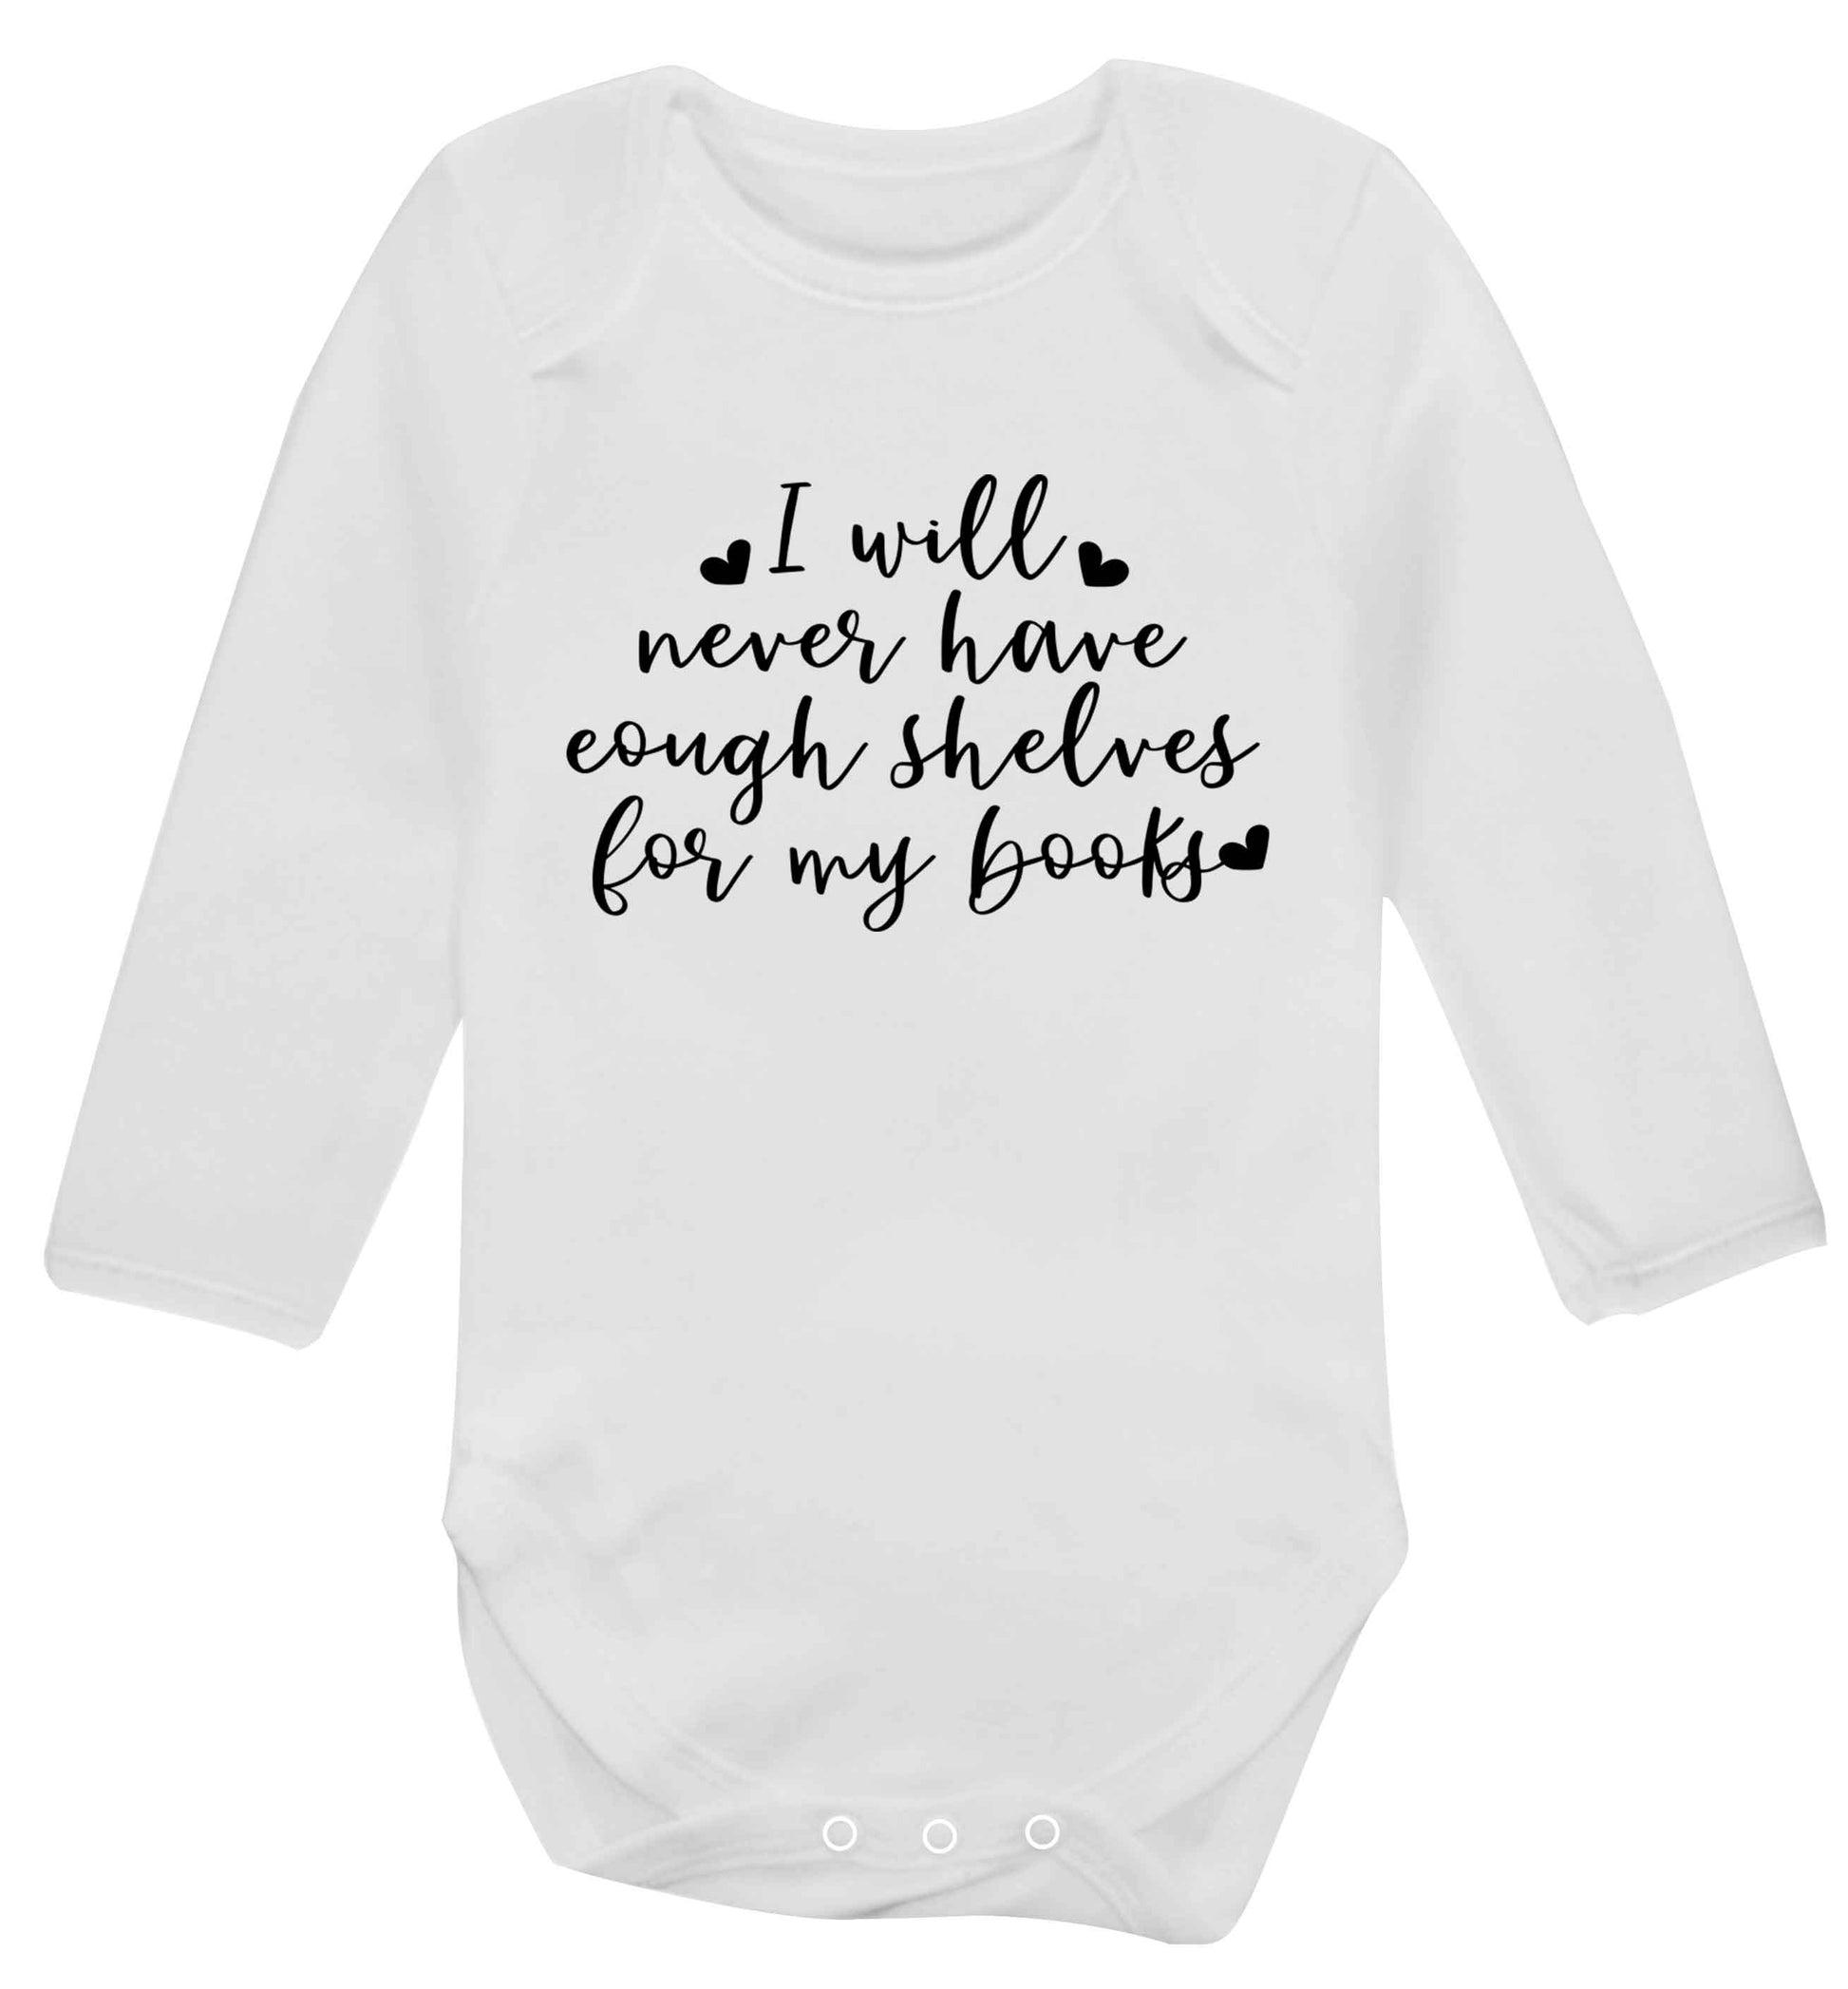 I will never have enough shelves for my books Baby Vest long sleeved white 6-12 months